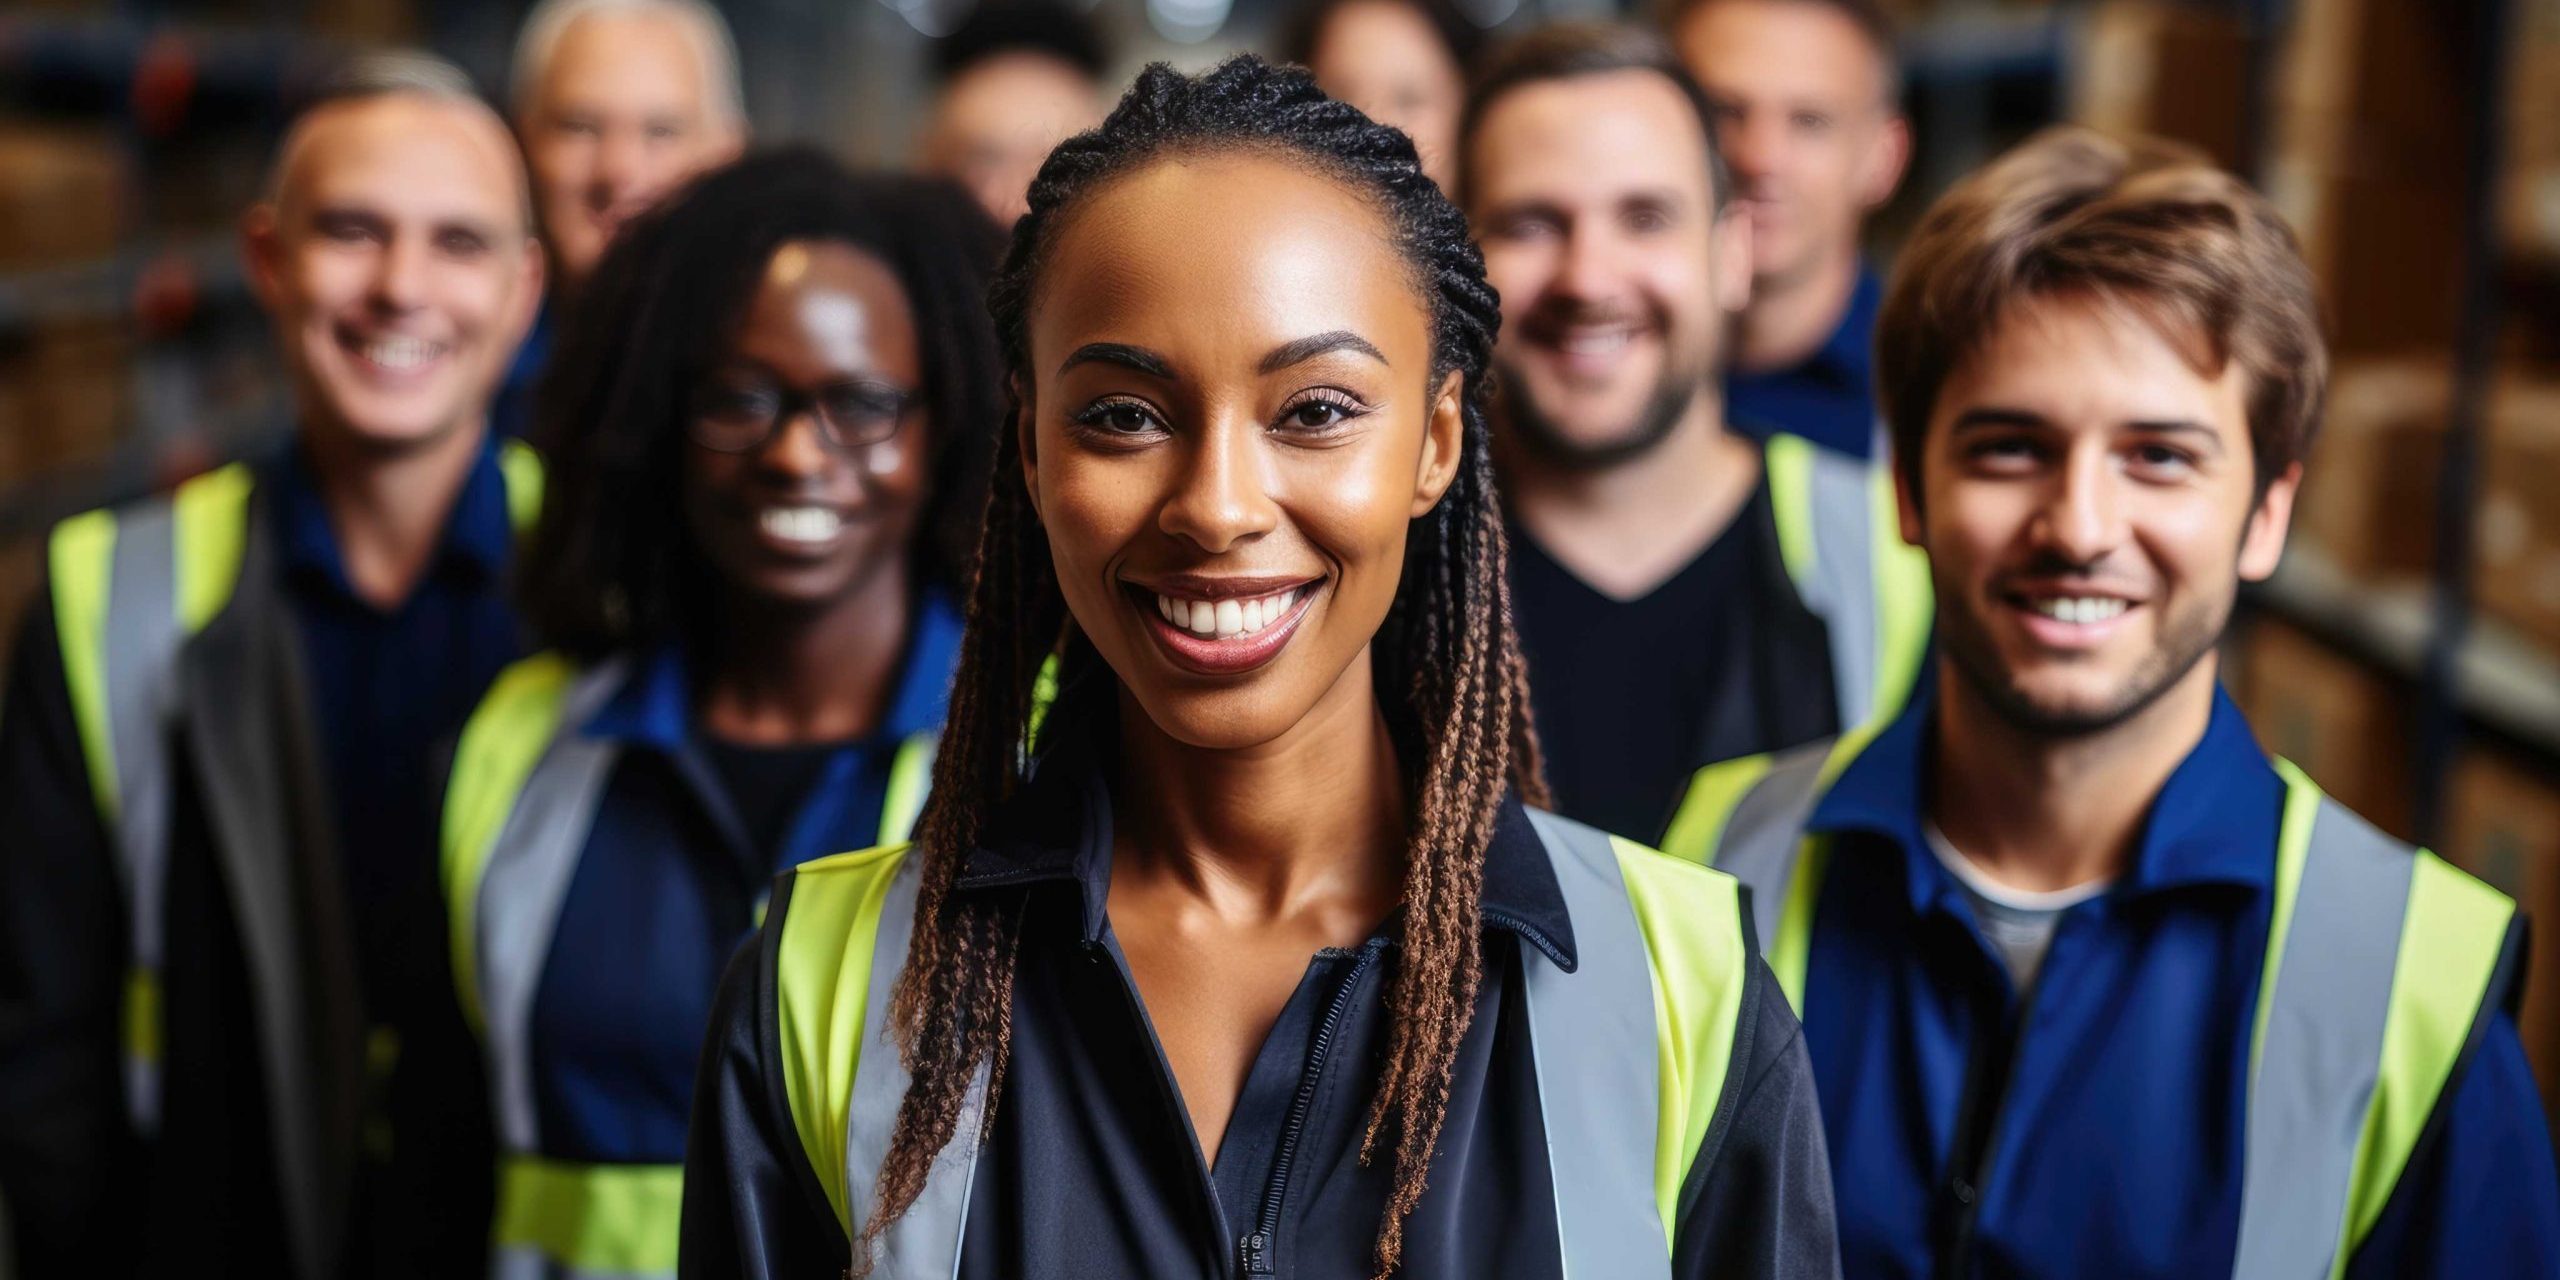 Group of diverse workers in a factory warehouse